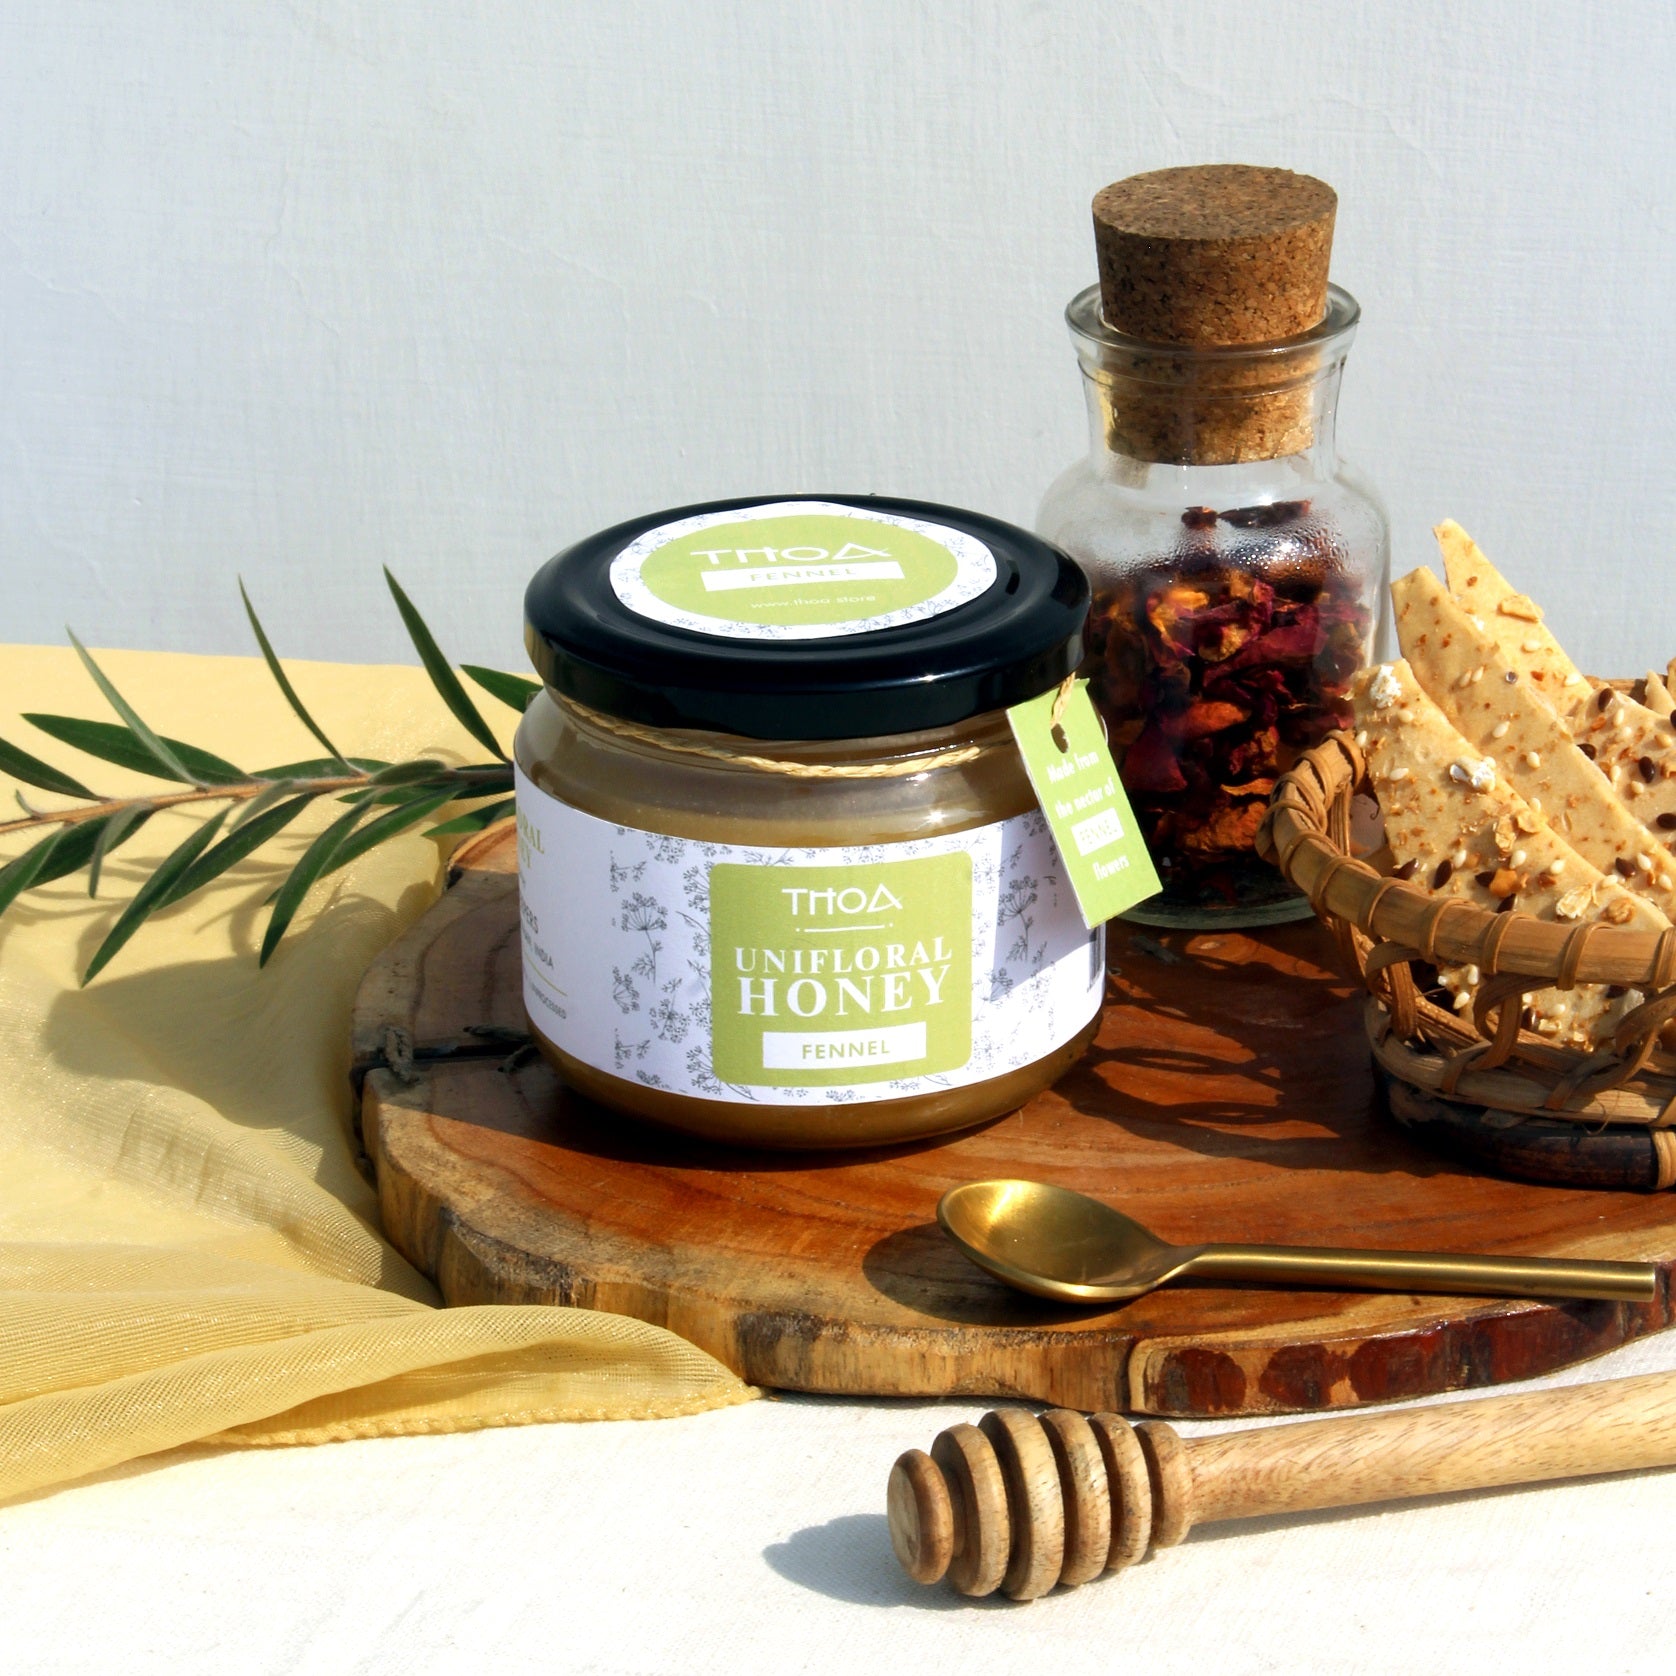 What makes THOA Unifloral Honey the healthiest on earth?